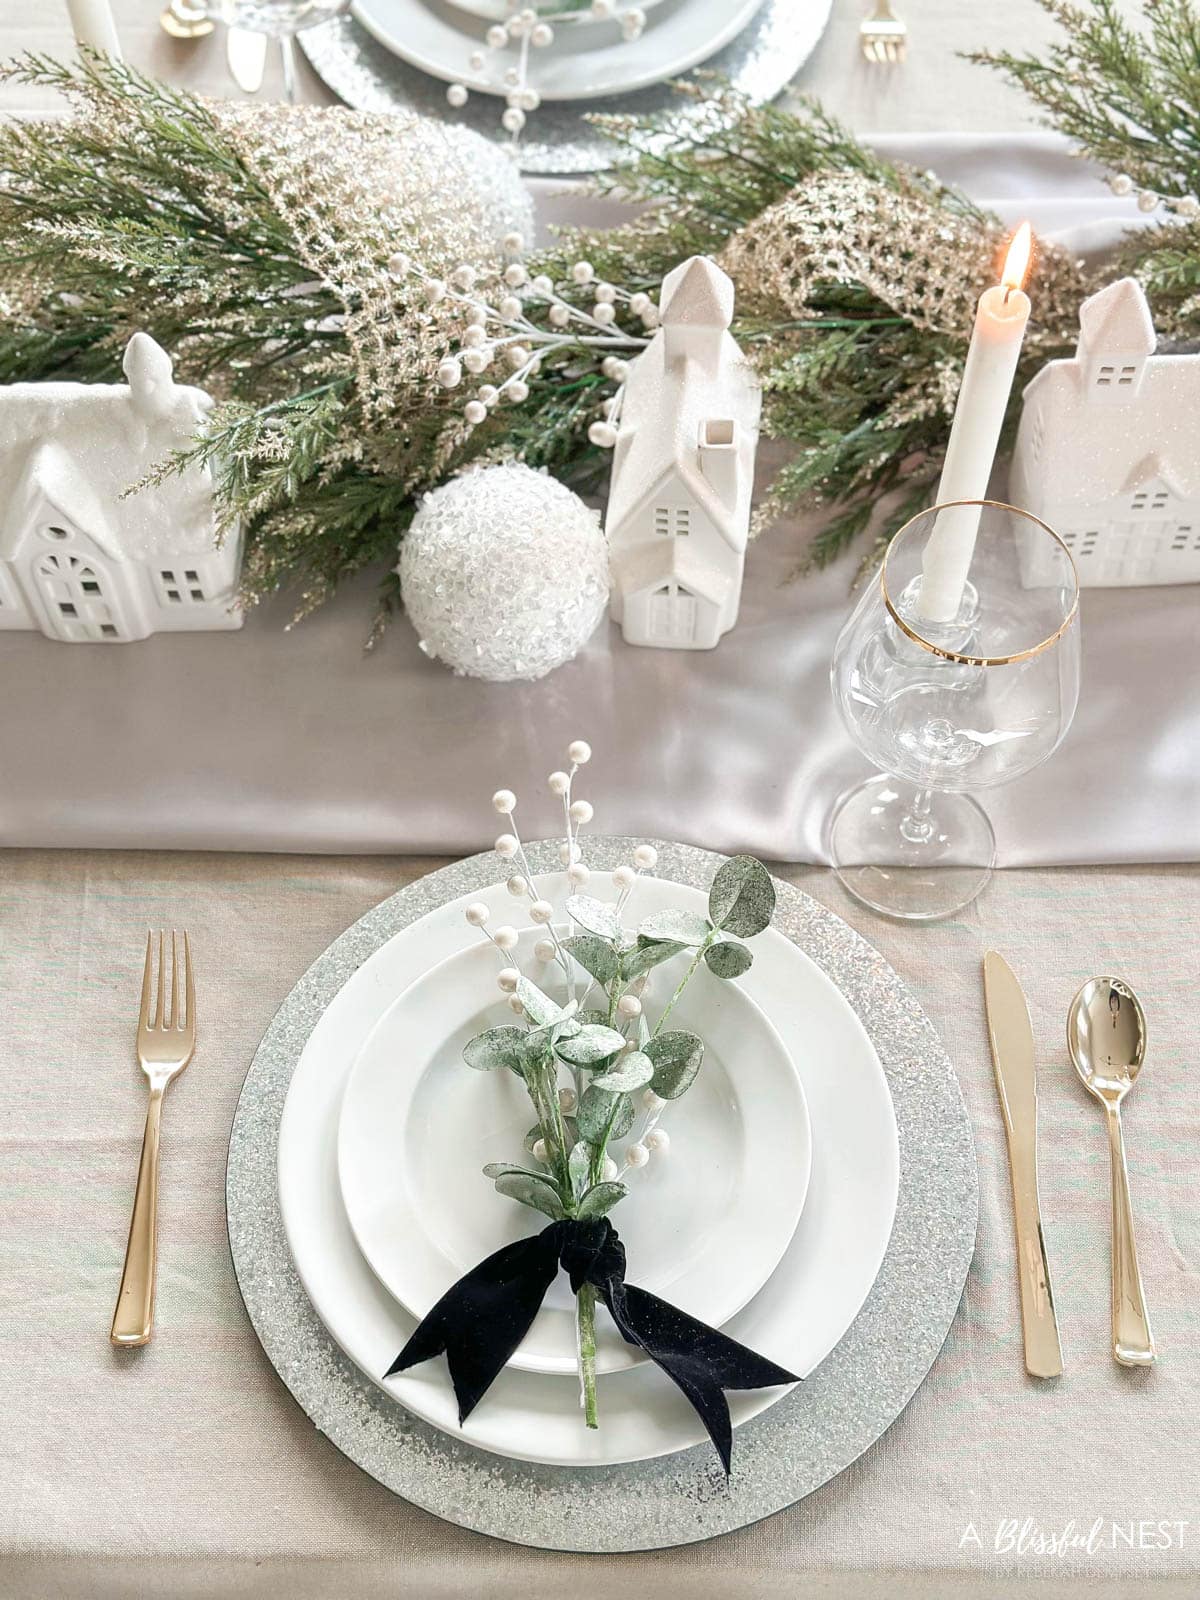 Christmas Table Setting With Neutral Accents